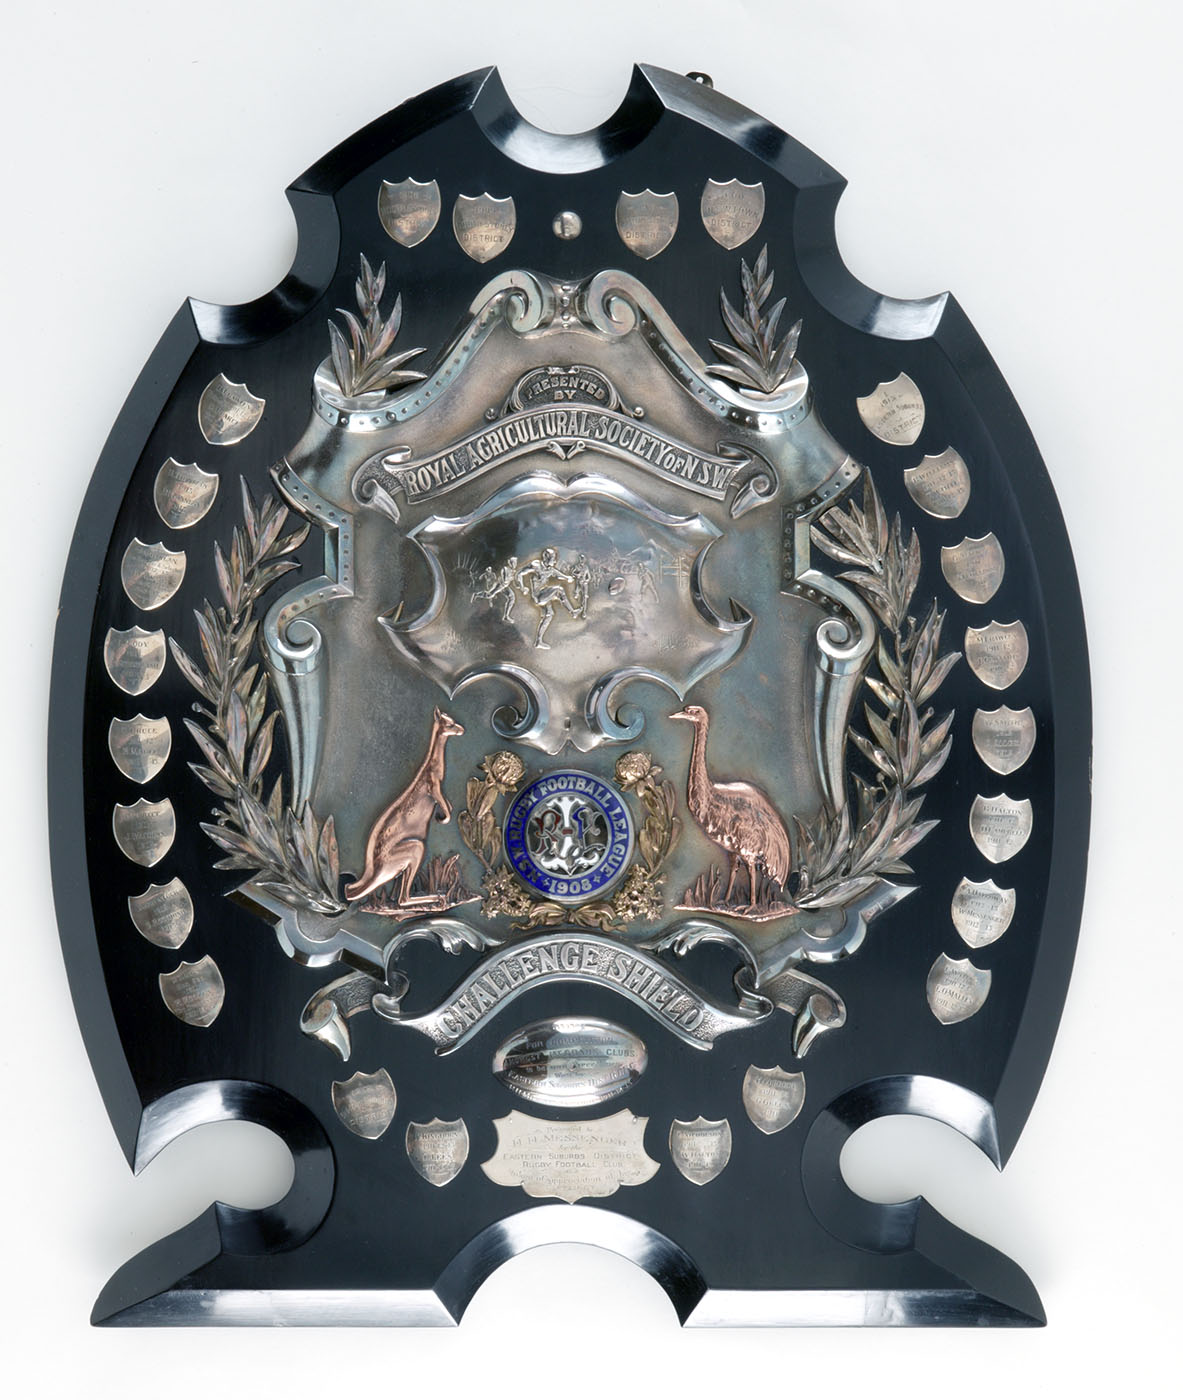 A sports shield with a football scene and coat of arms at the centre. Numerous small silver shield-shaped plaques are mounted around the edge of the trophy. 